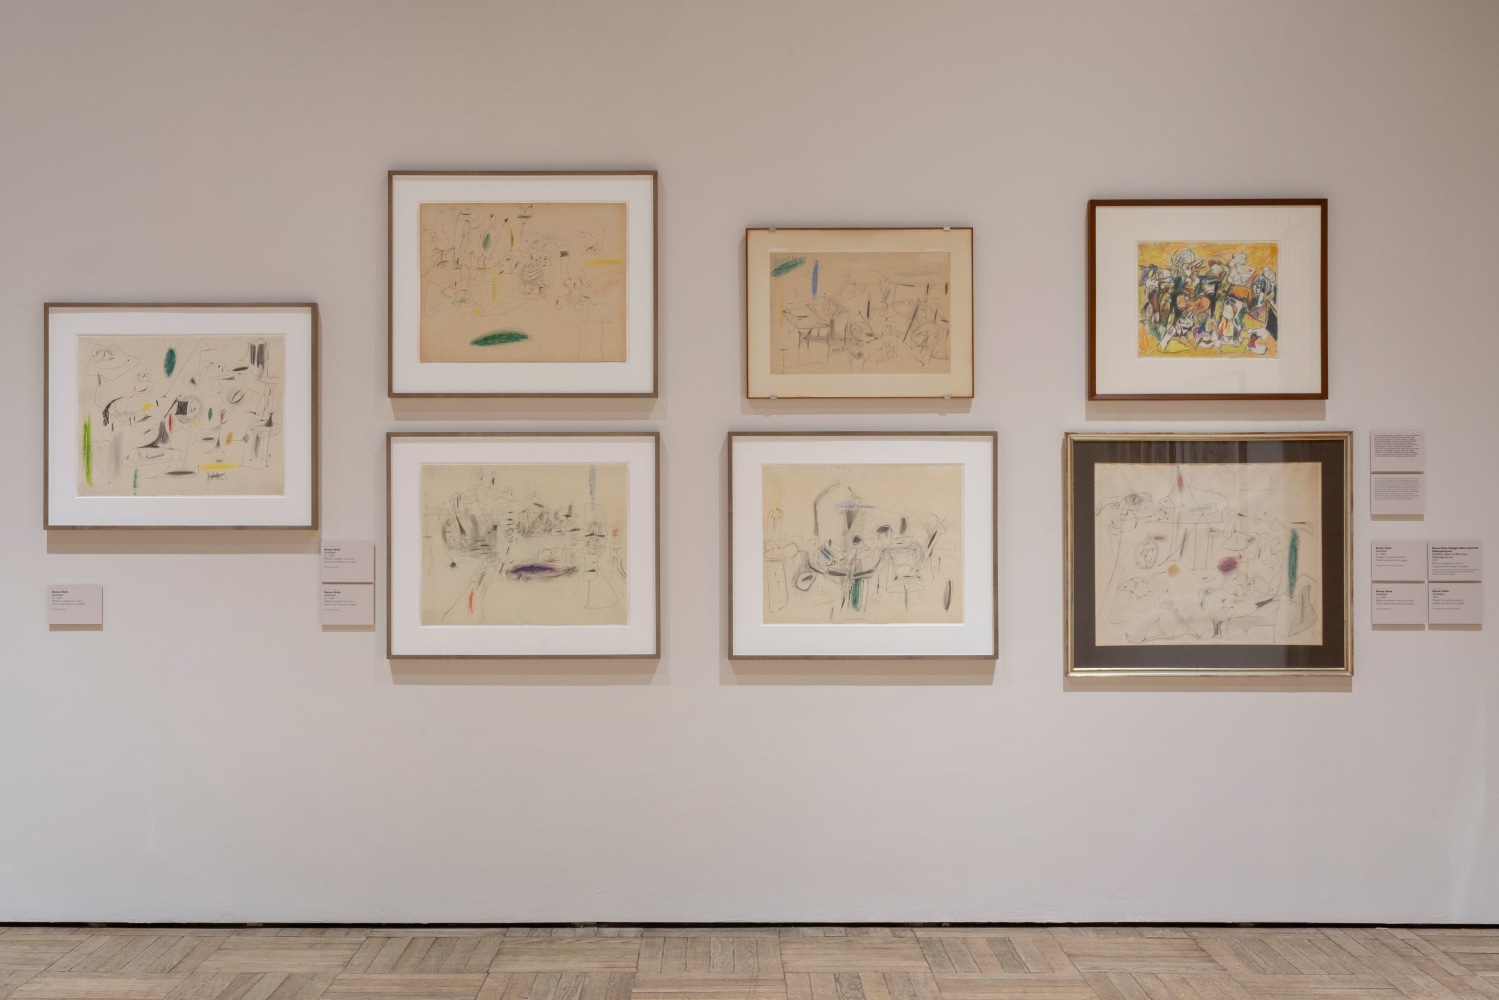 Installation photograph showing a seven abstract drawings by Gorky from the 1940s